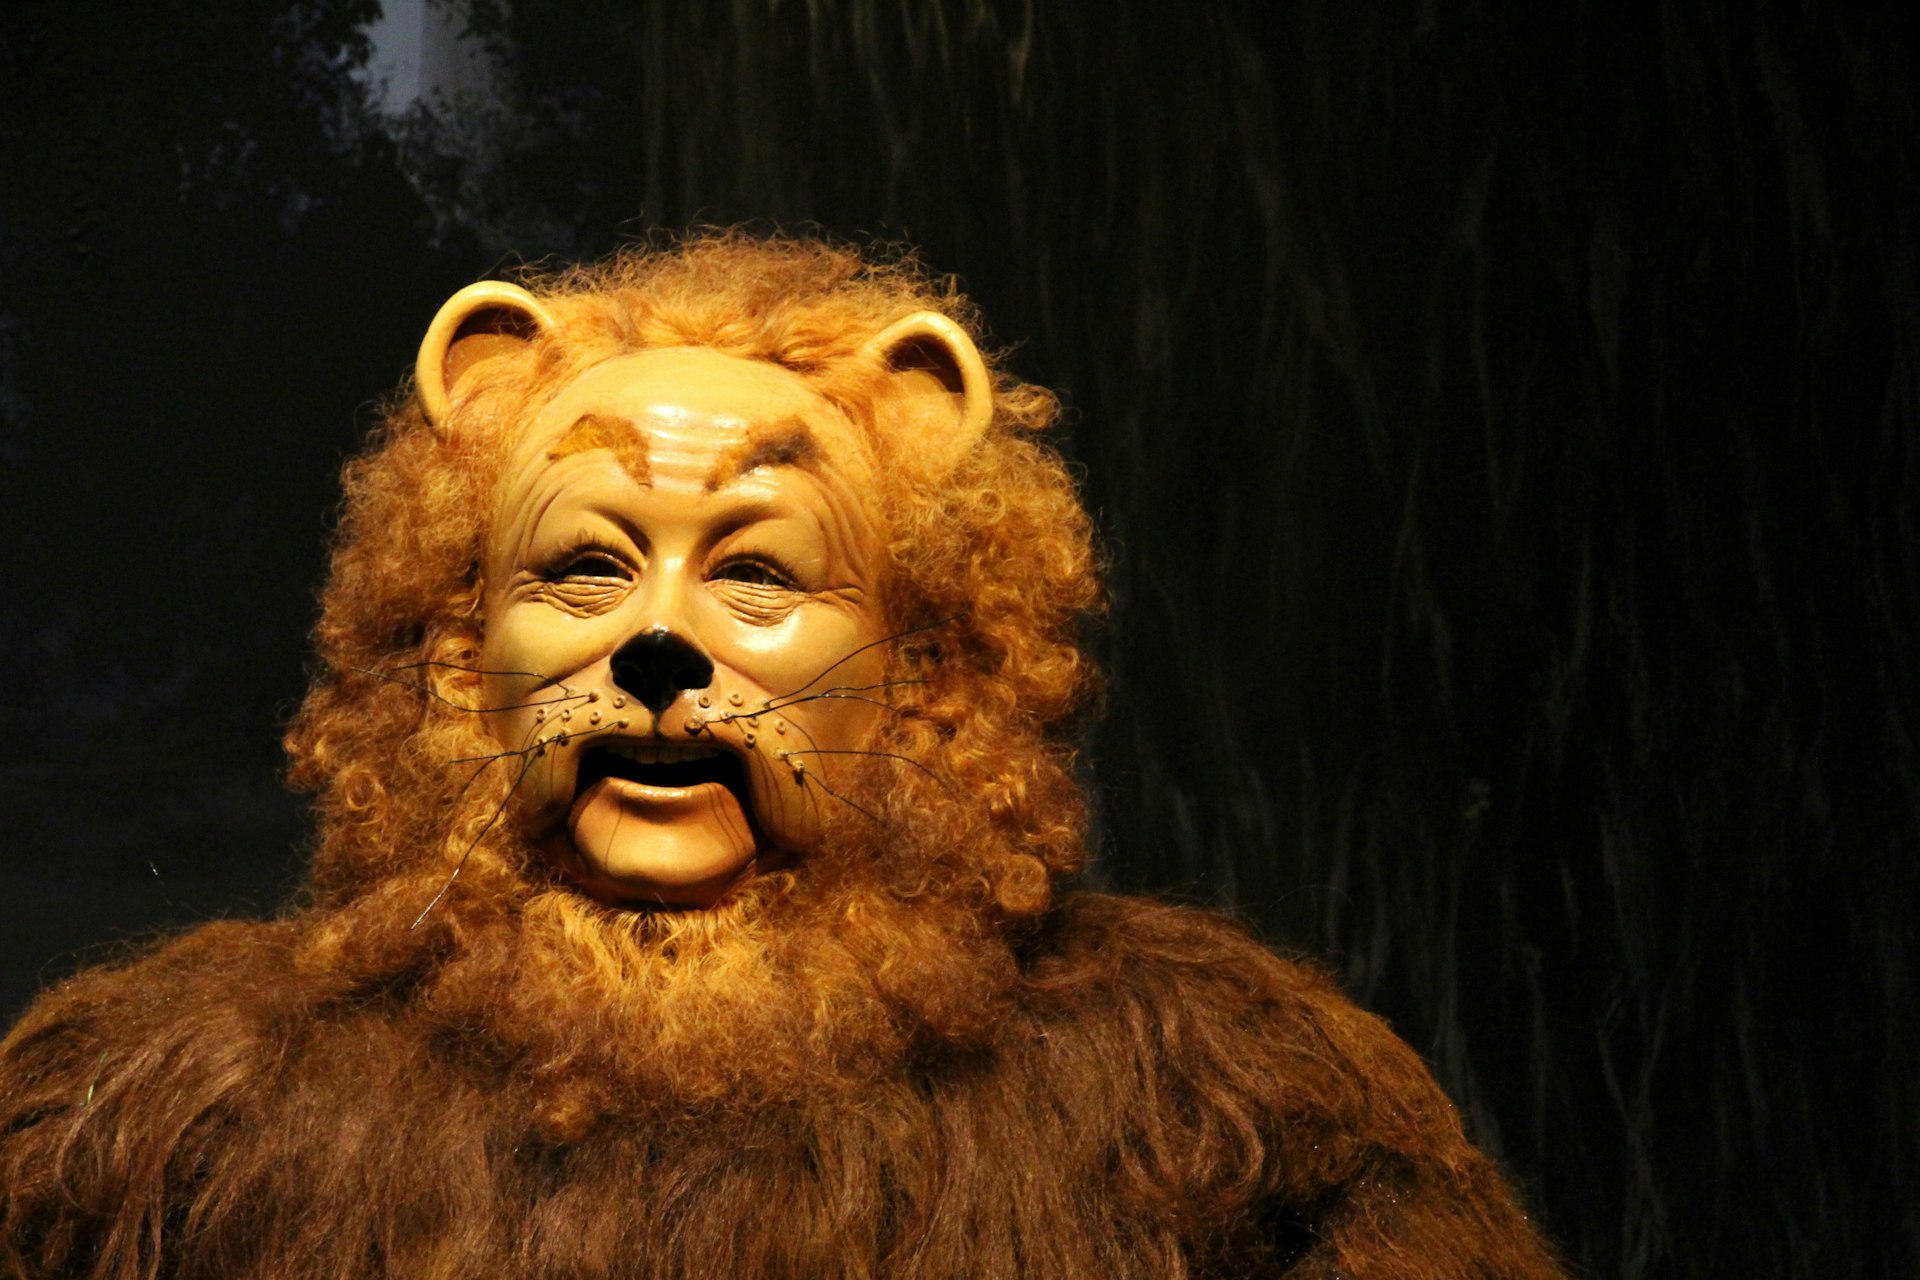 The Cowardly Lion at the Oz Museum in Wamego, Kansas